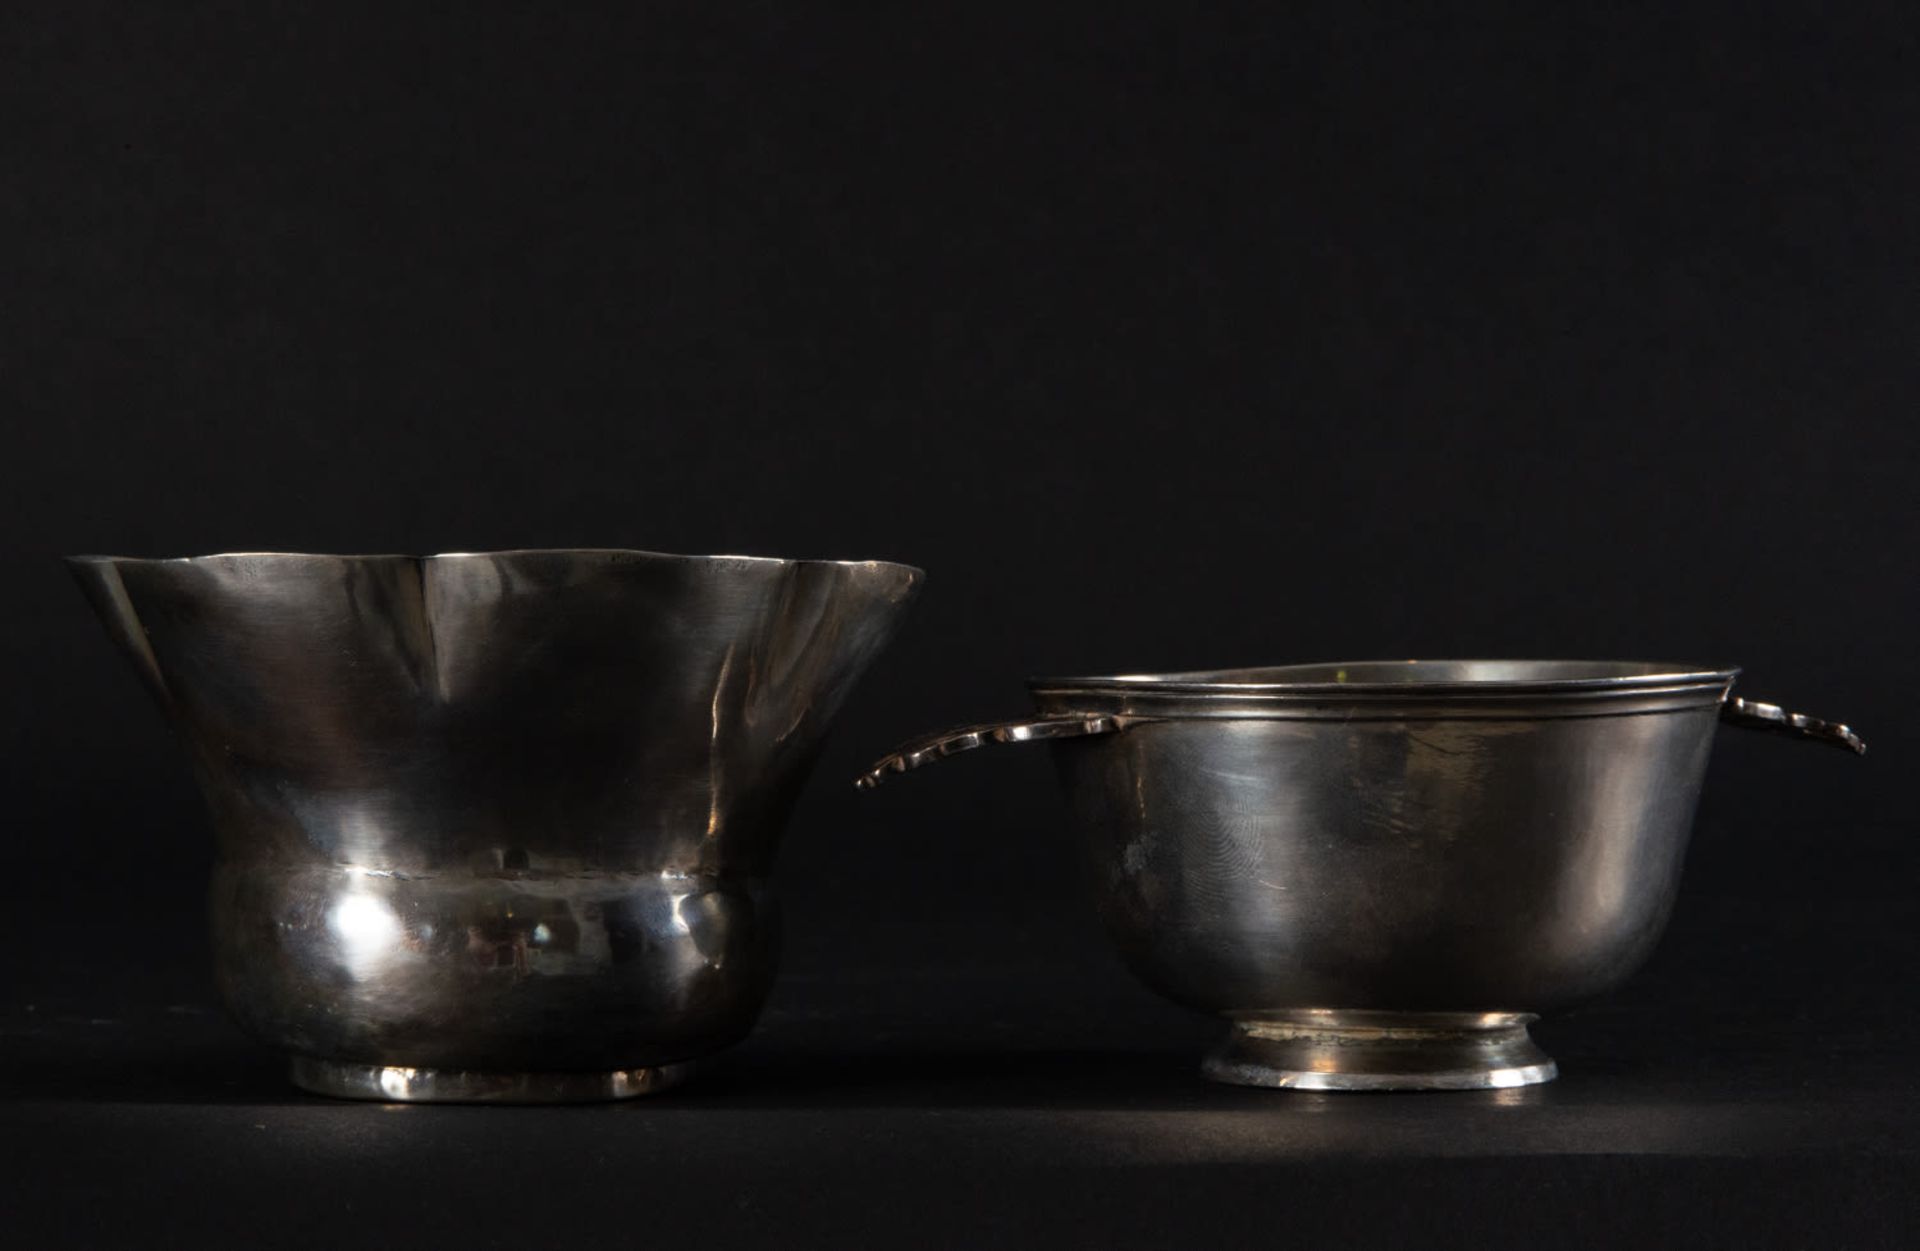 Pair of Wine Glass and Salvilla in solid silver from the 18th century, marks of Grande, Córdoba